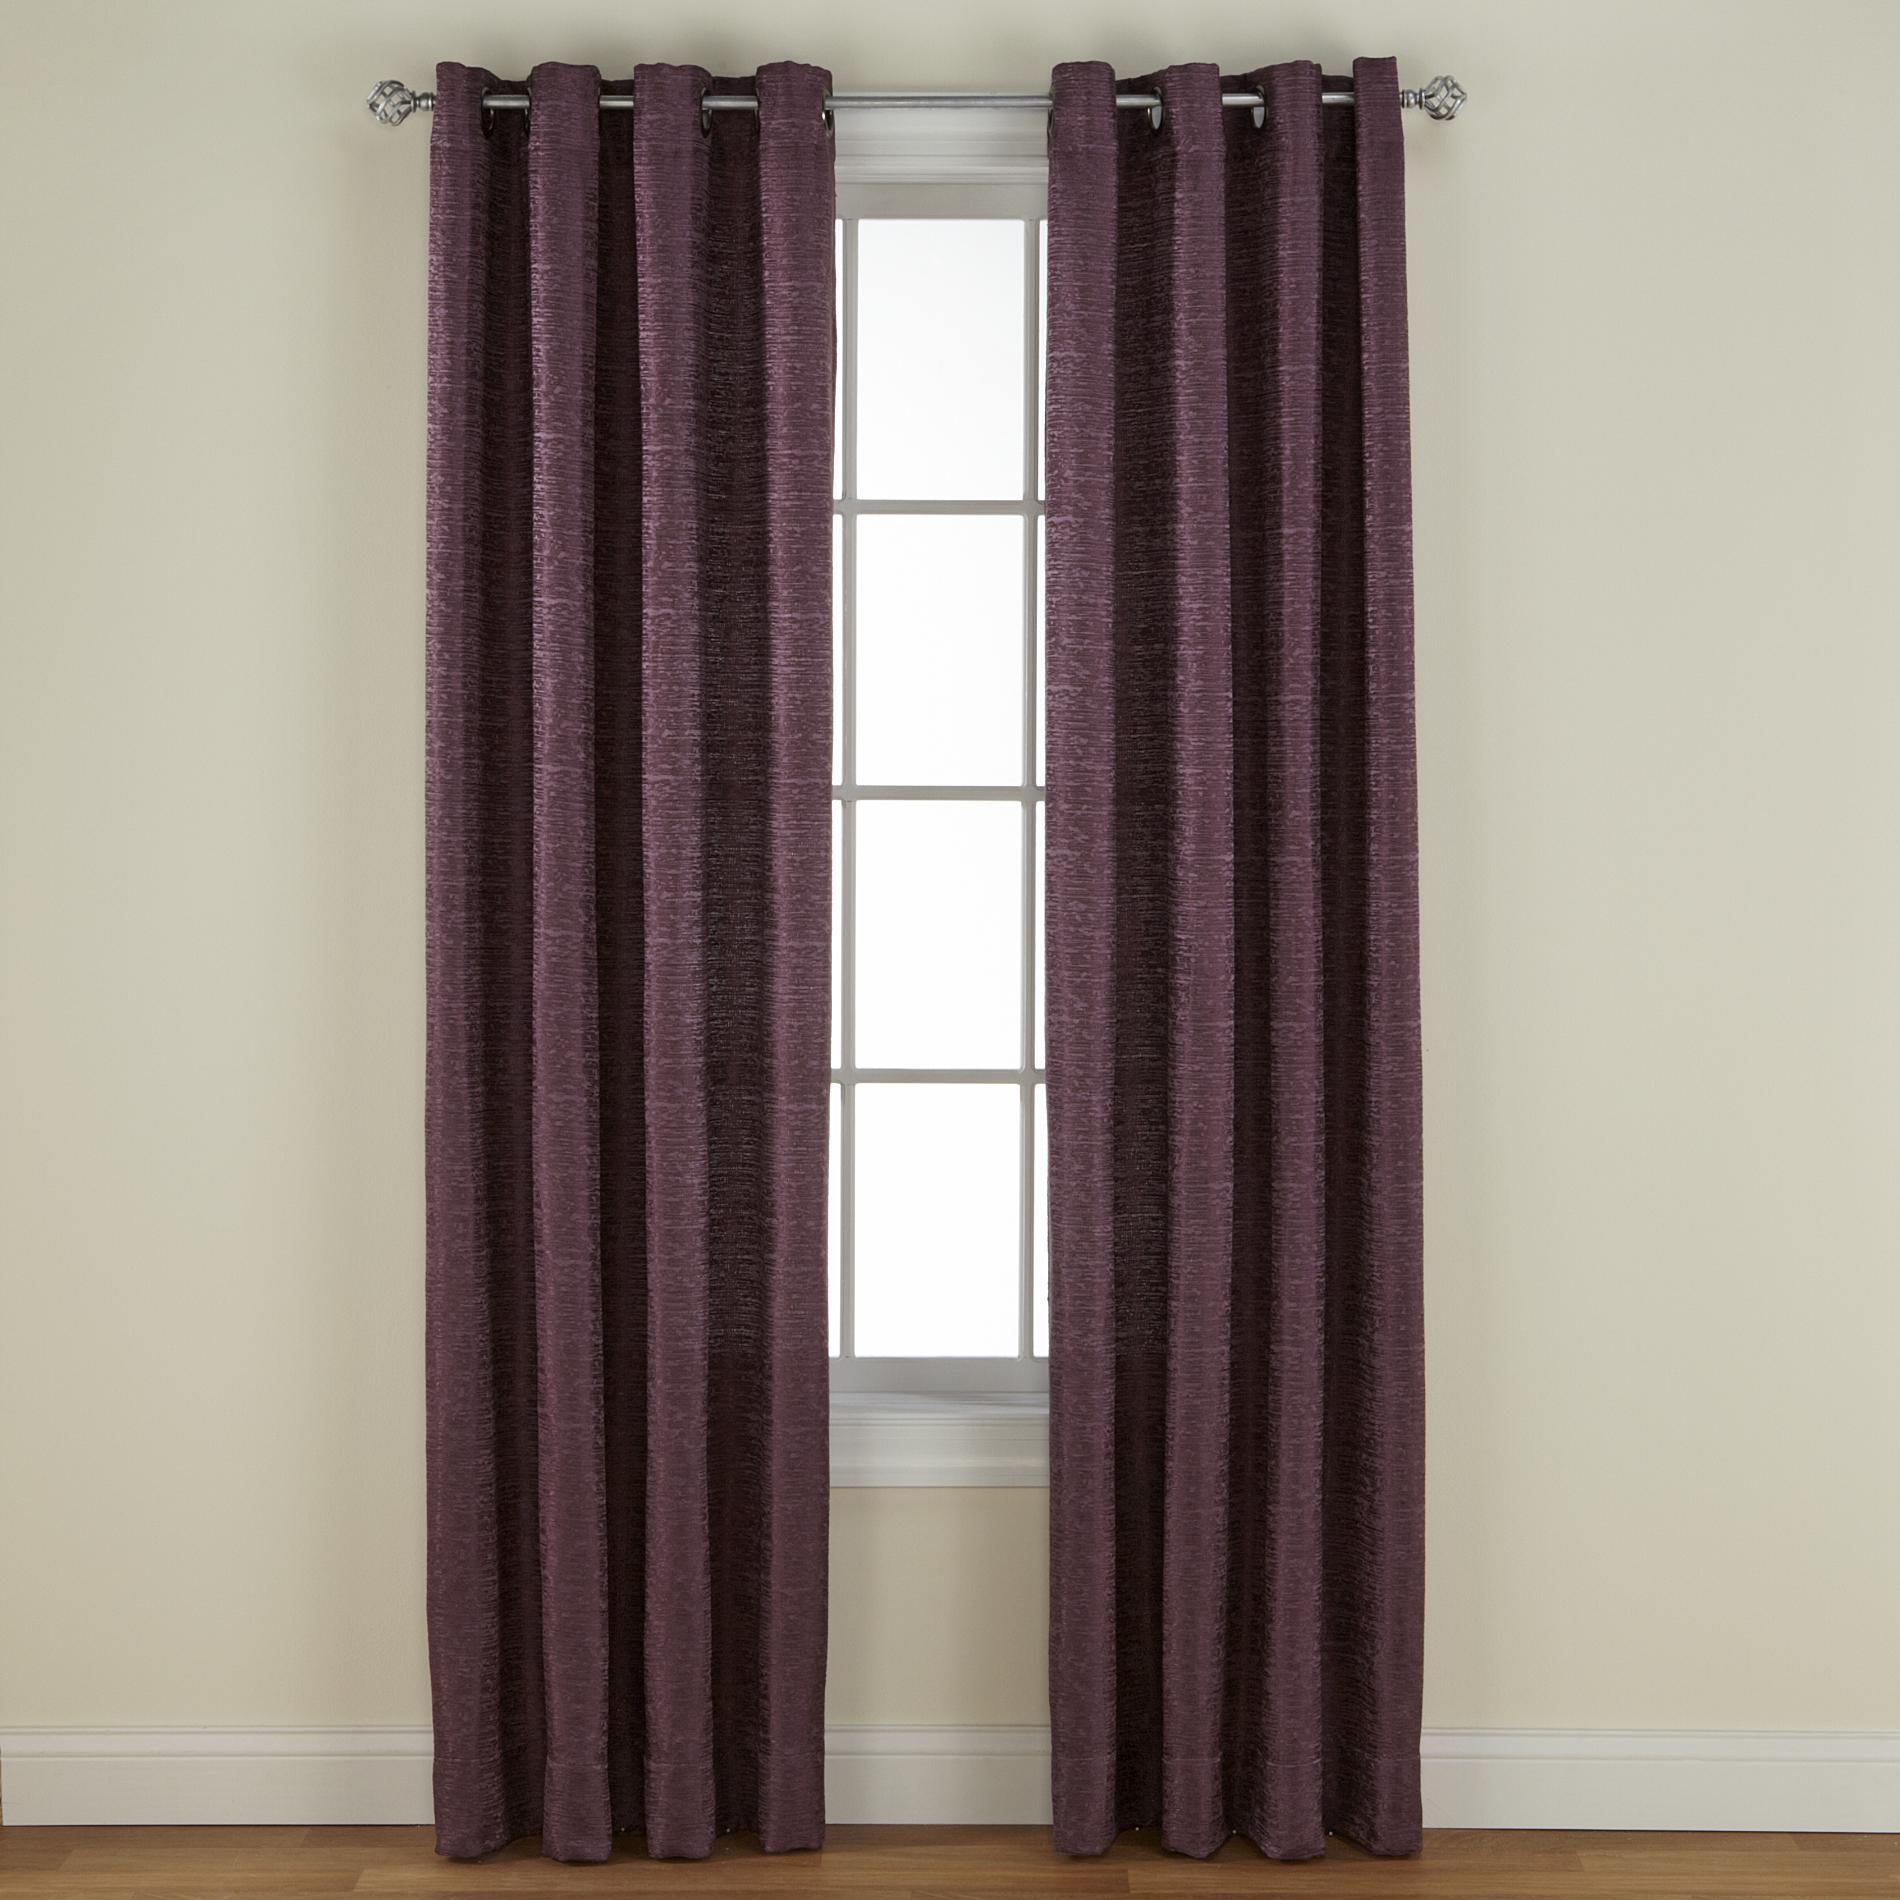 UPC 678298186883 product image for Regal Home Montclair Grommet Curtain Panel - REGAL HOME COLLECTIONS INC. | upcitemdb.com